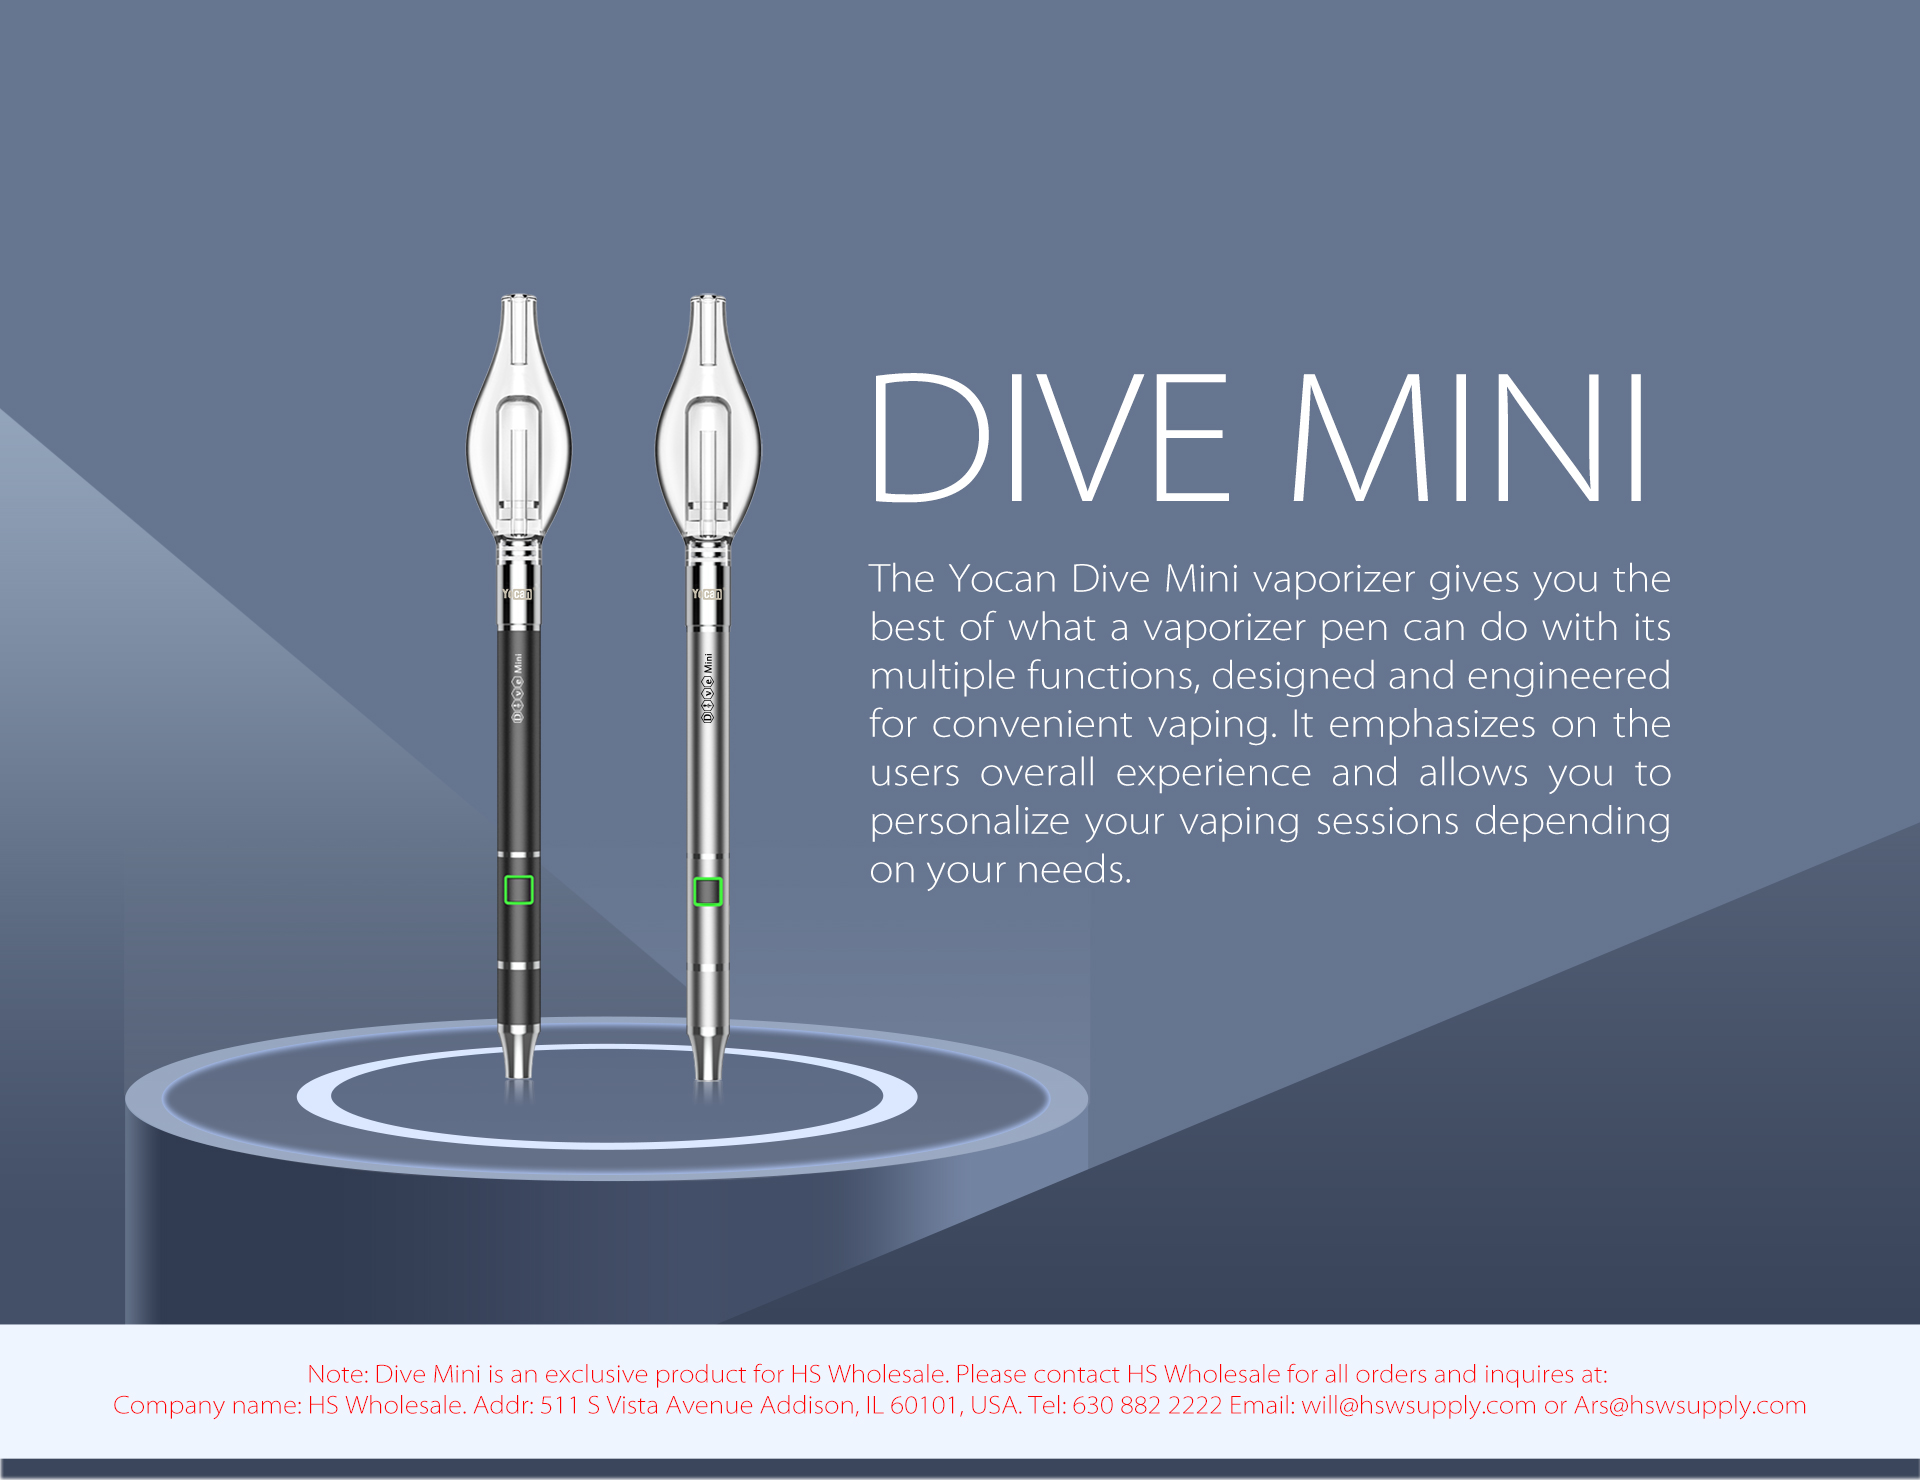 Yocan Dive Mini vaporizer emphasizes on the users overall experience.